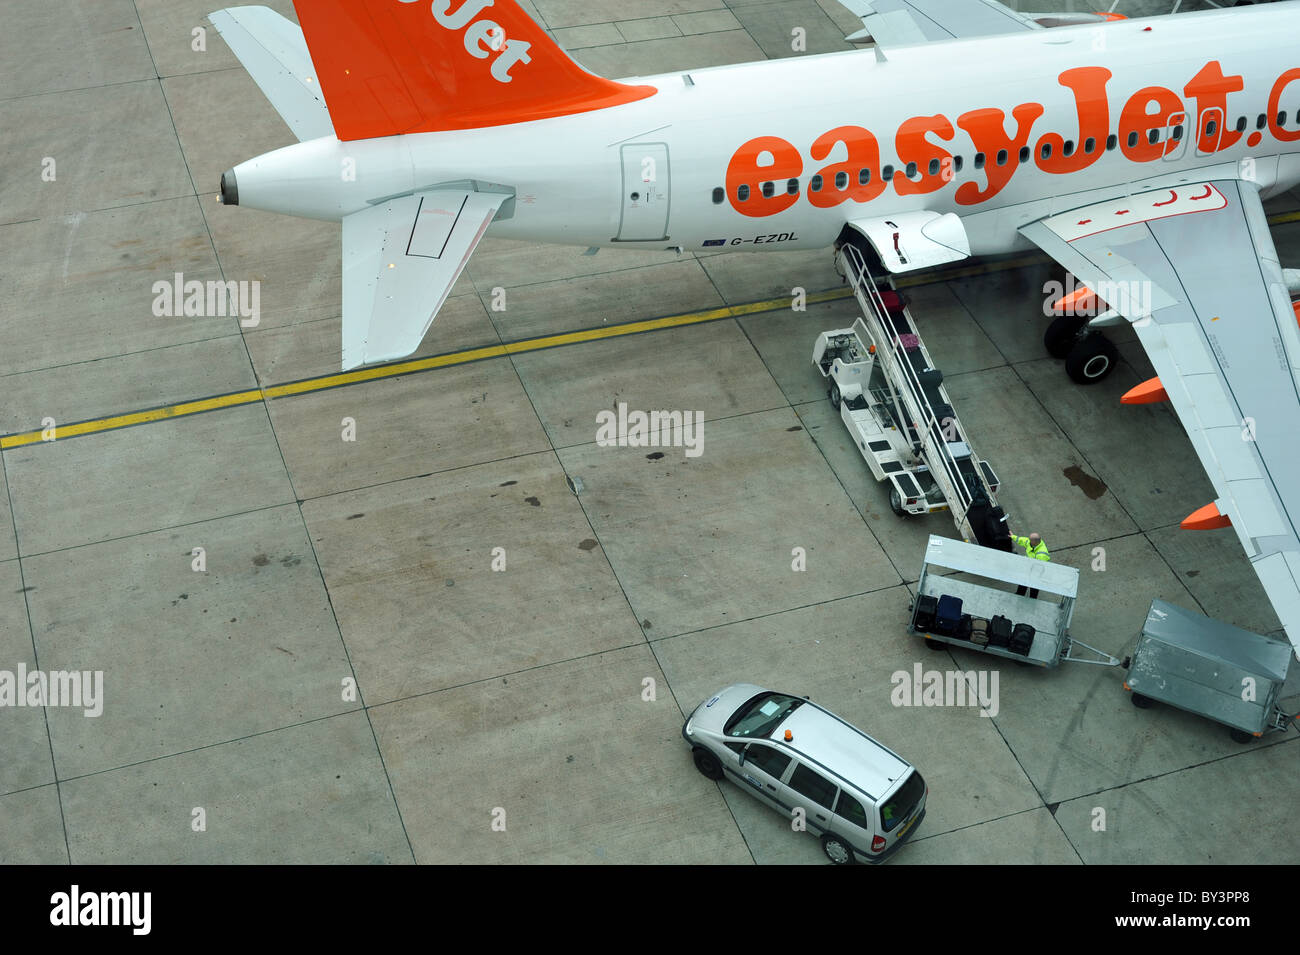 Baggage handlers loading hold luggage onto an aircraft - Gatwick, UK Stock Photo